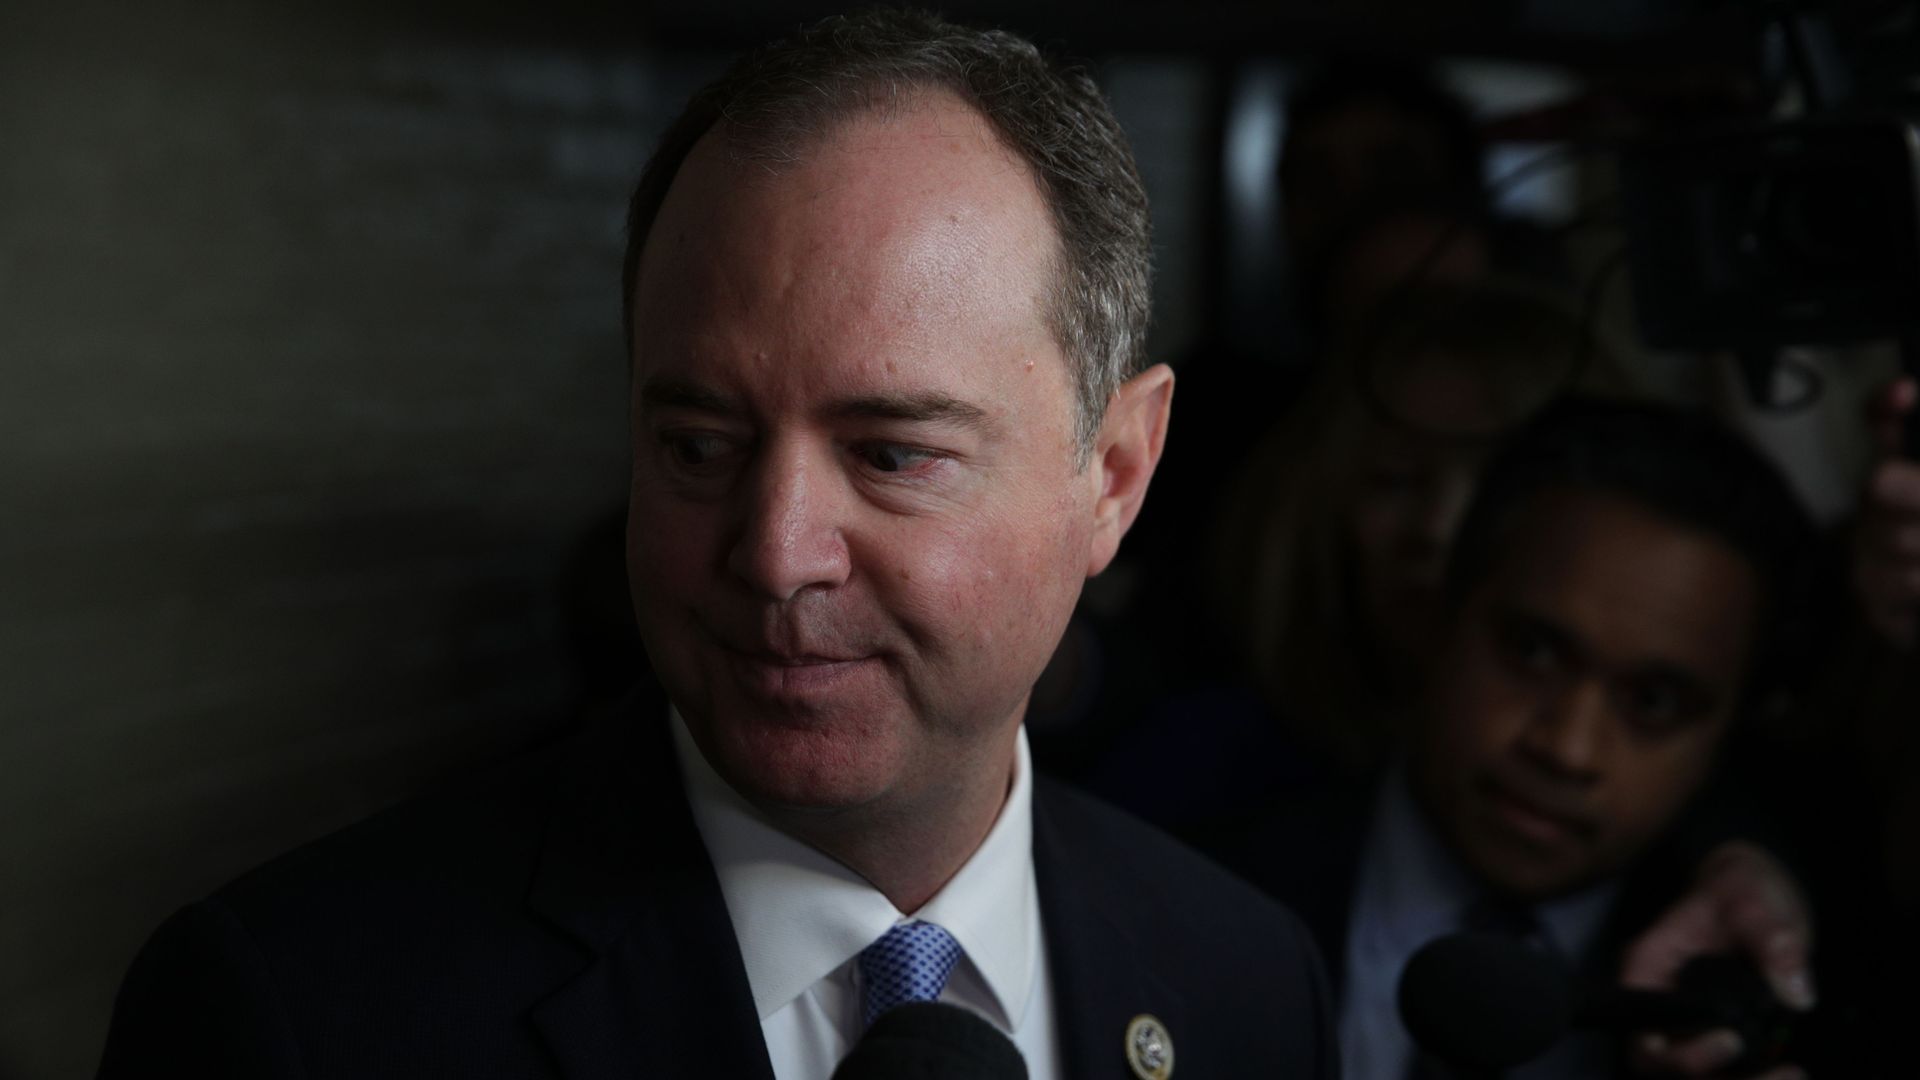 In this image, Adam Schiff looks down while wearing a suit.